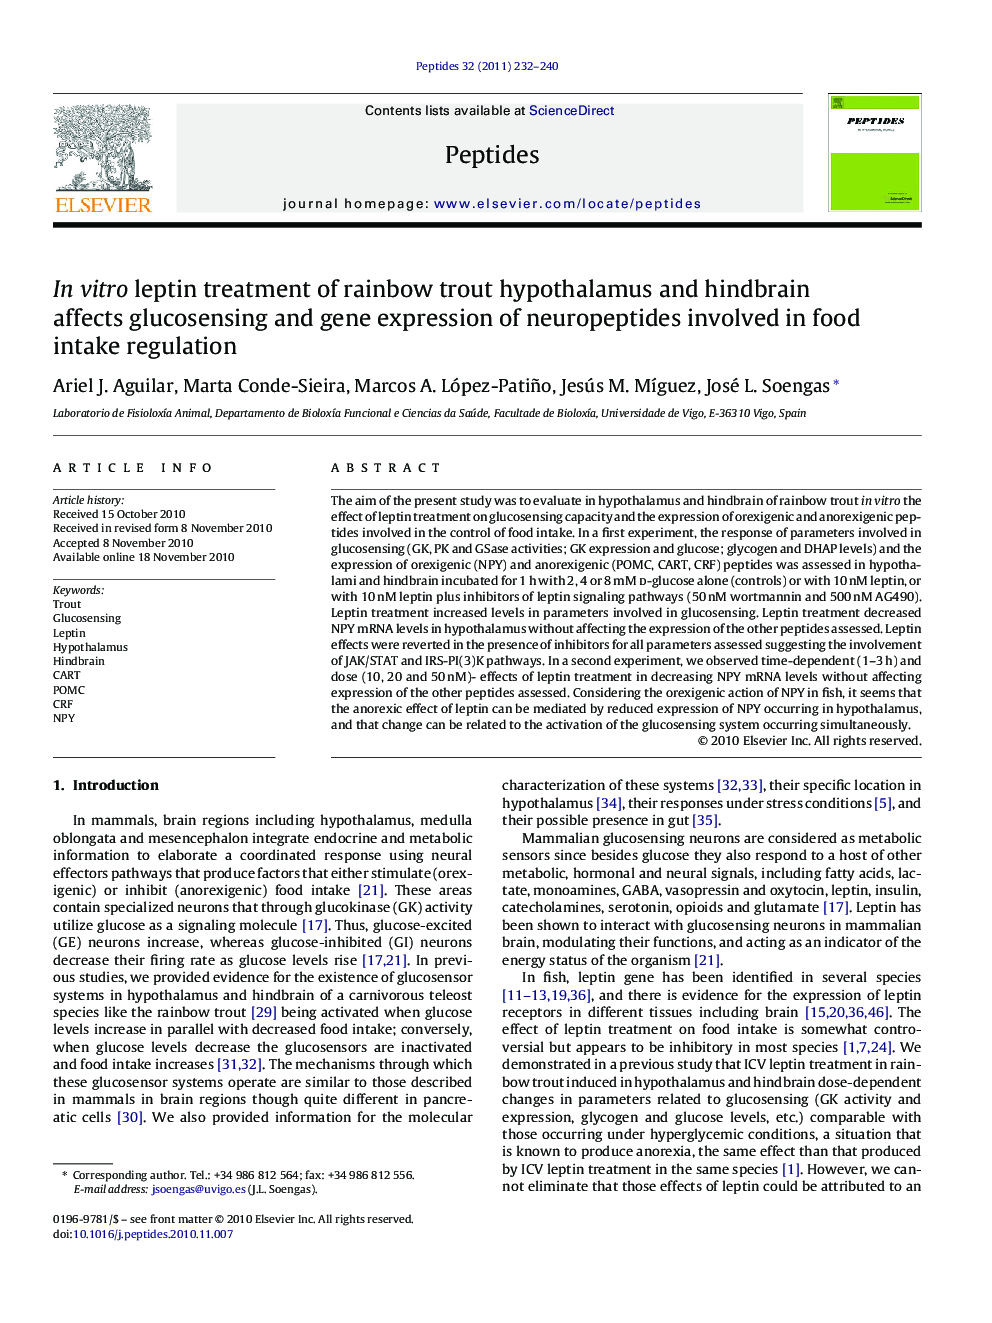 In vitro leptin treatment of rainbow trout hypothalamus and hindbrain affects glucosensing and gene expression of neuropeptides involved in food intake regulation